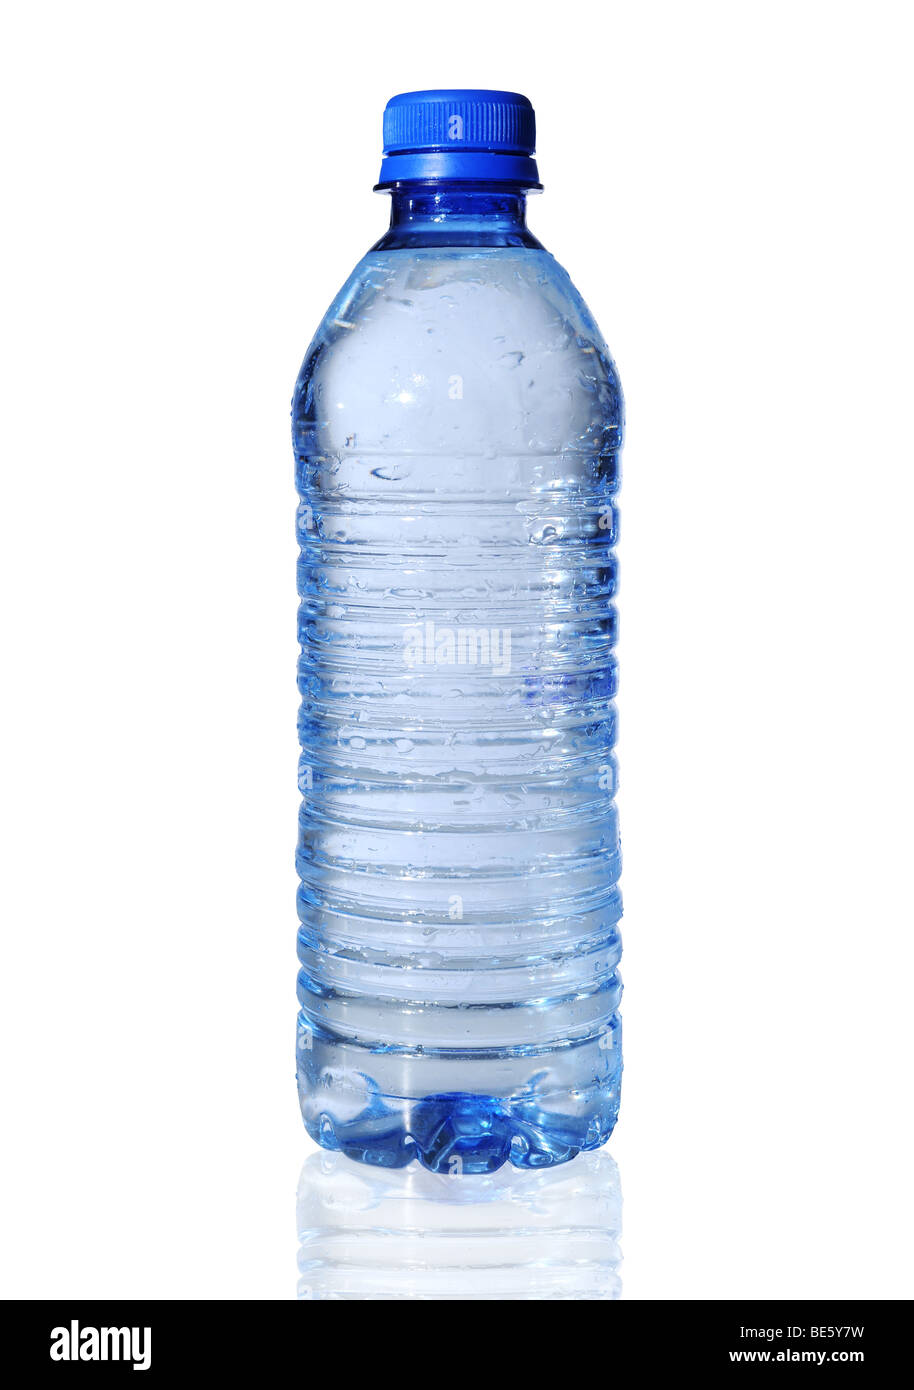 https://c8.alamy.com/comp/BE5Y7W/bottled-water-isolated-over-a-white-background-BE5Y7W.jpg